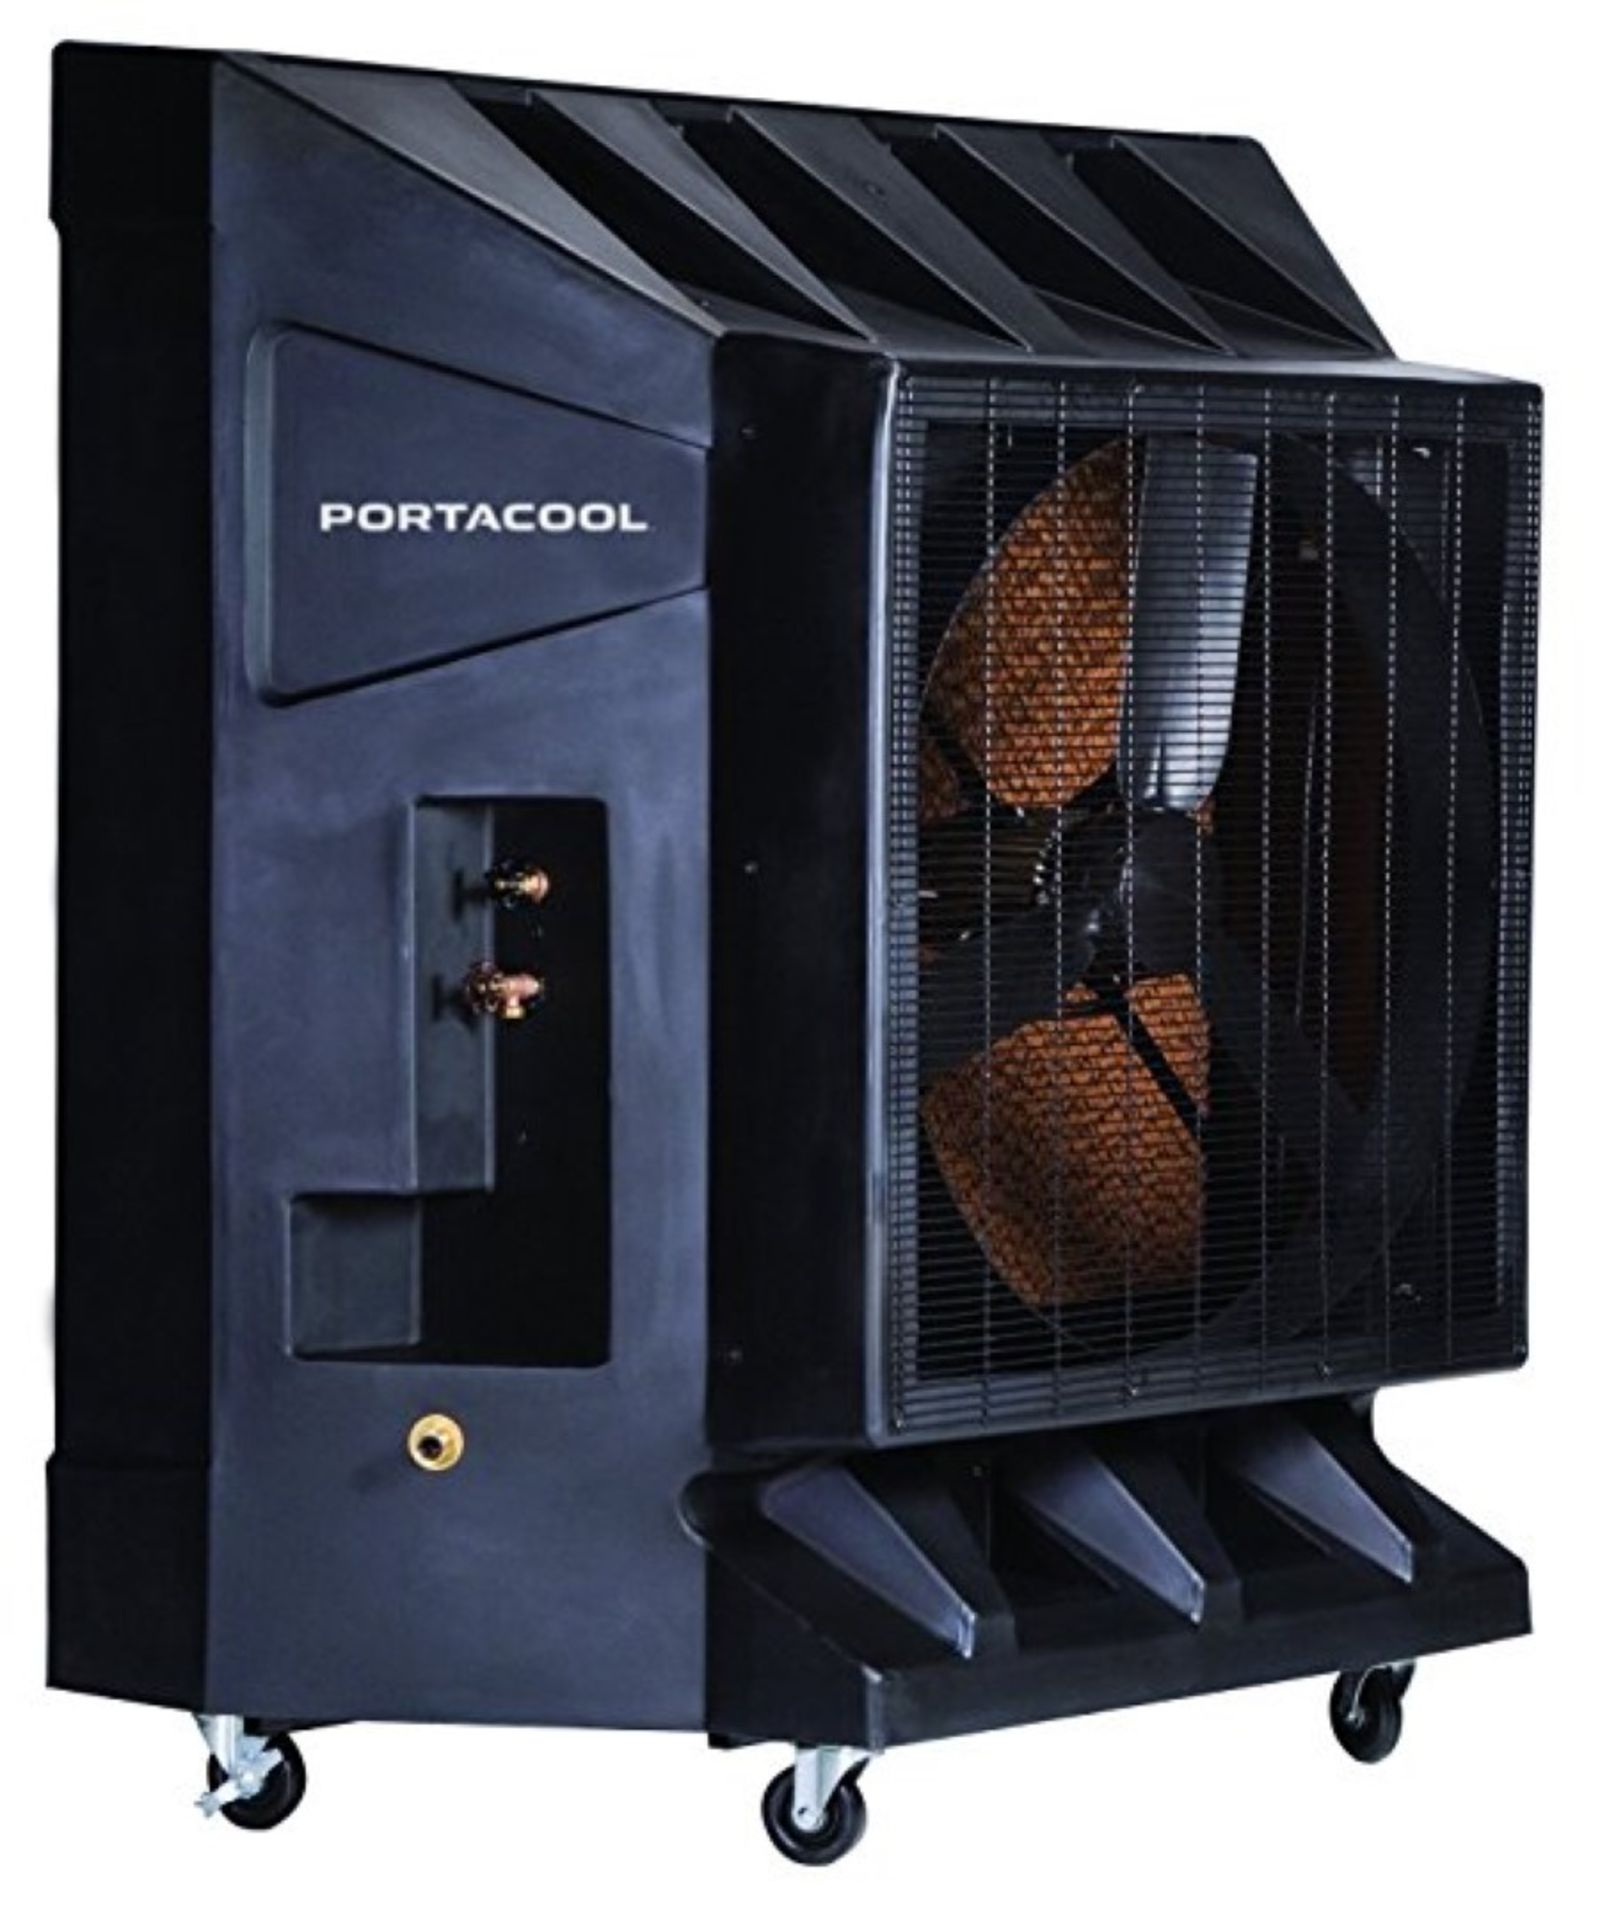 2500 SQFT CAPACITY 36" PORTABLE EVAPORATIVE AIR COOLER (NEW IN A BOX) - Image 2 of 6